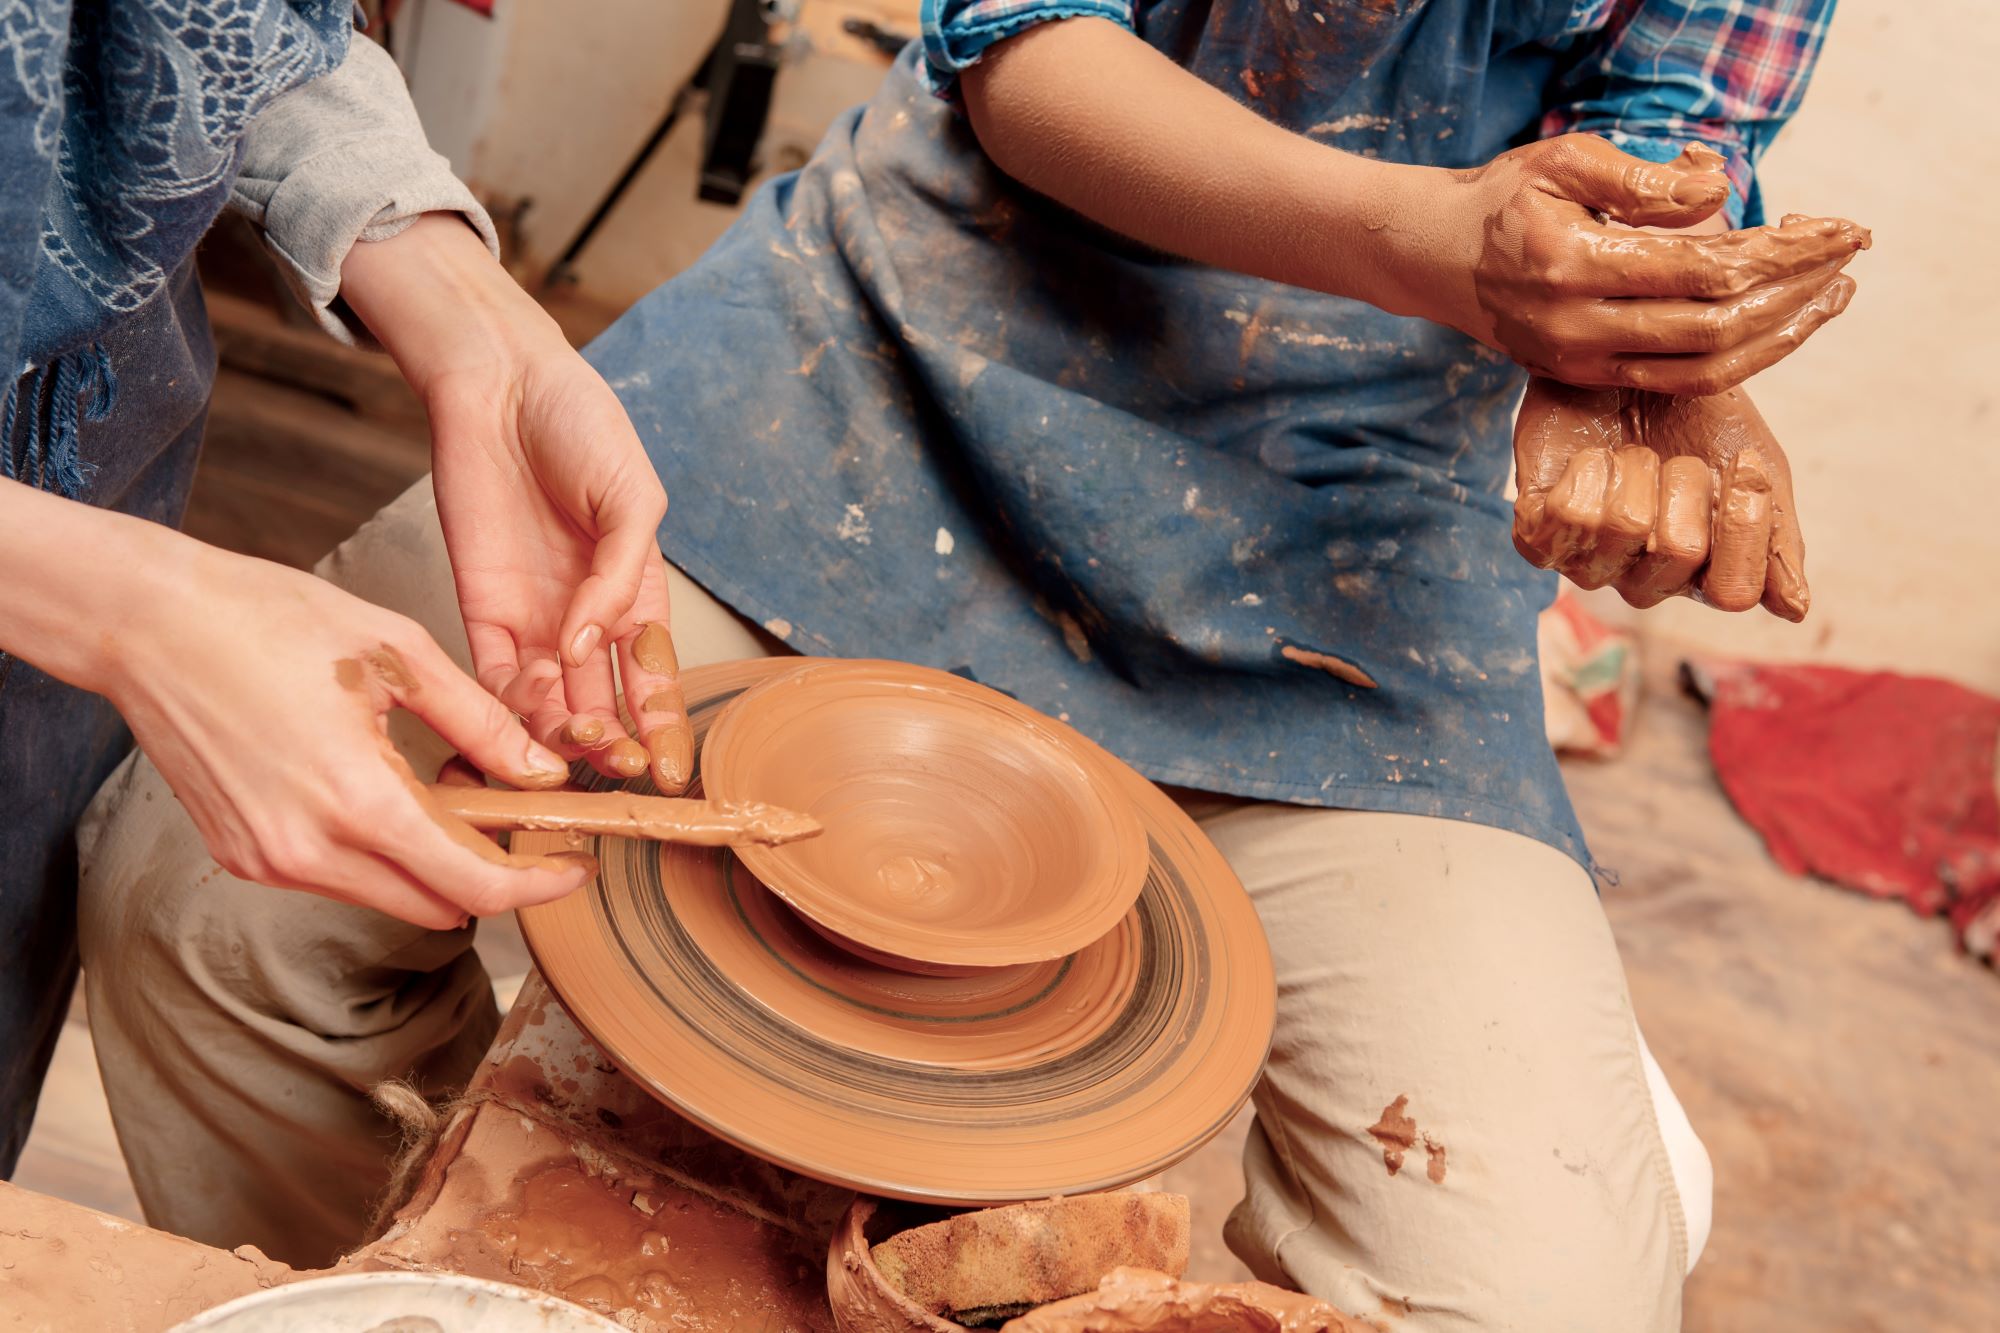 Two people making pottery as a profitable hobbies